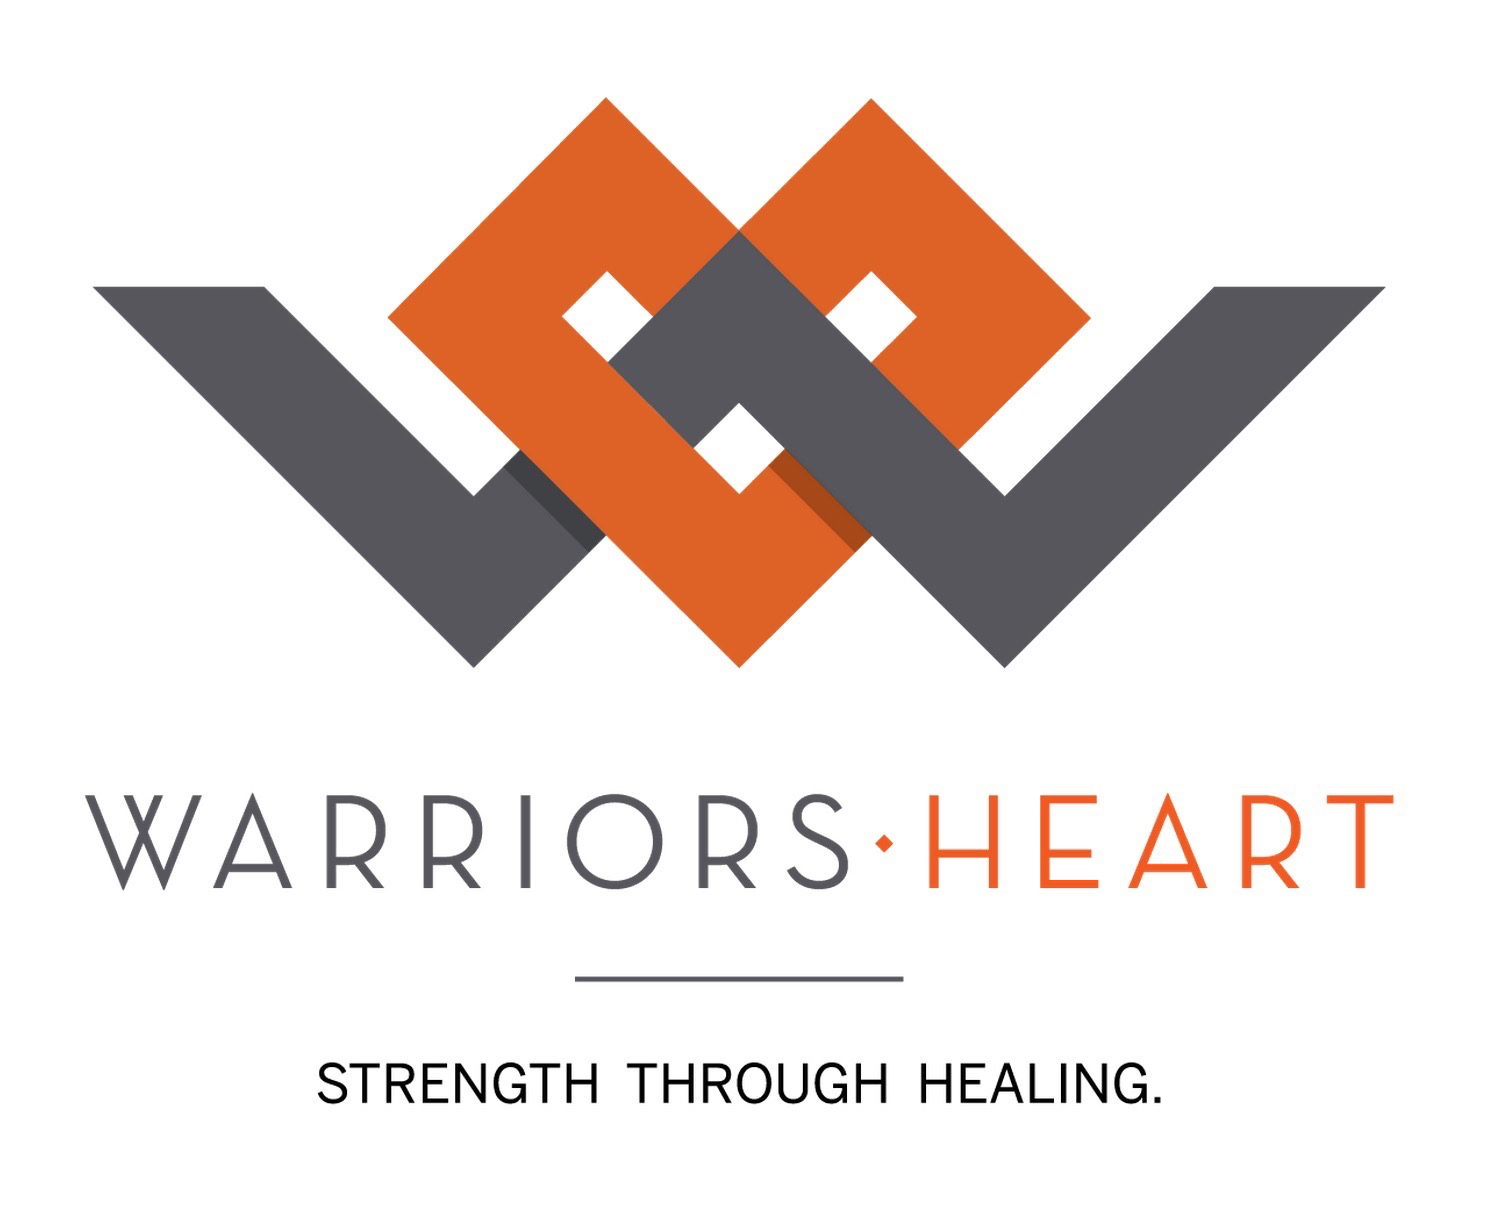 Warriors Heart is changing the narrative to "Strength Through Healing" through their "warriors healing warriors" healing programs